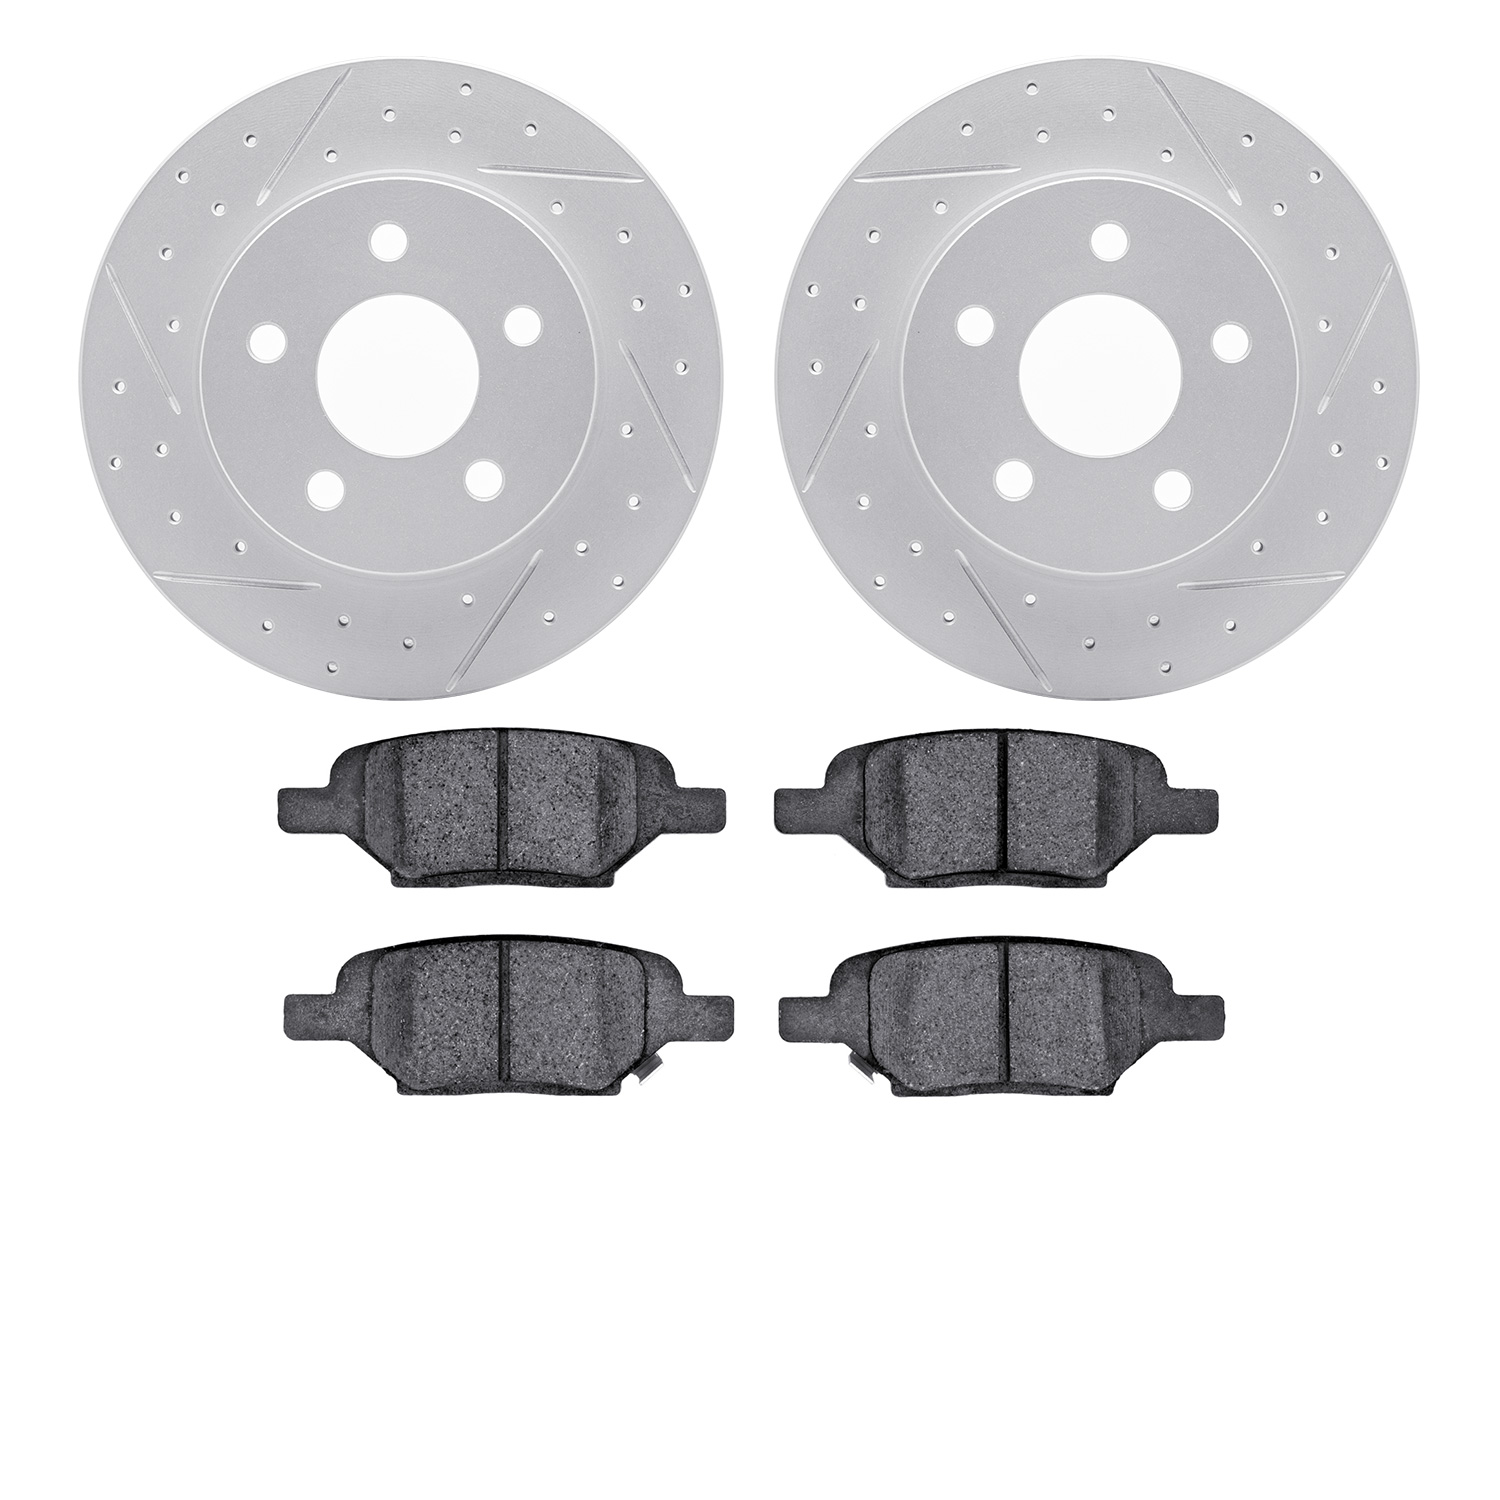 2502-53005 Geoperformance Drilled/Slotted Rotors w/5000 Advanced Brake Pads Kit, 2004-2012 GM, Position: Rear